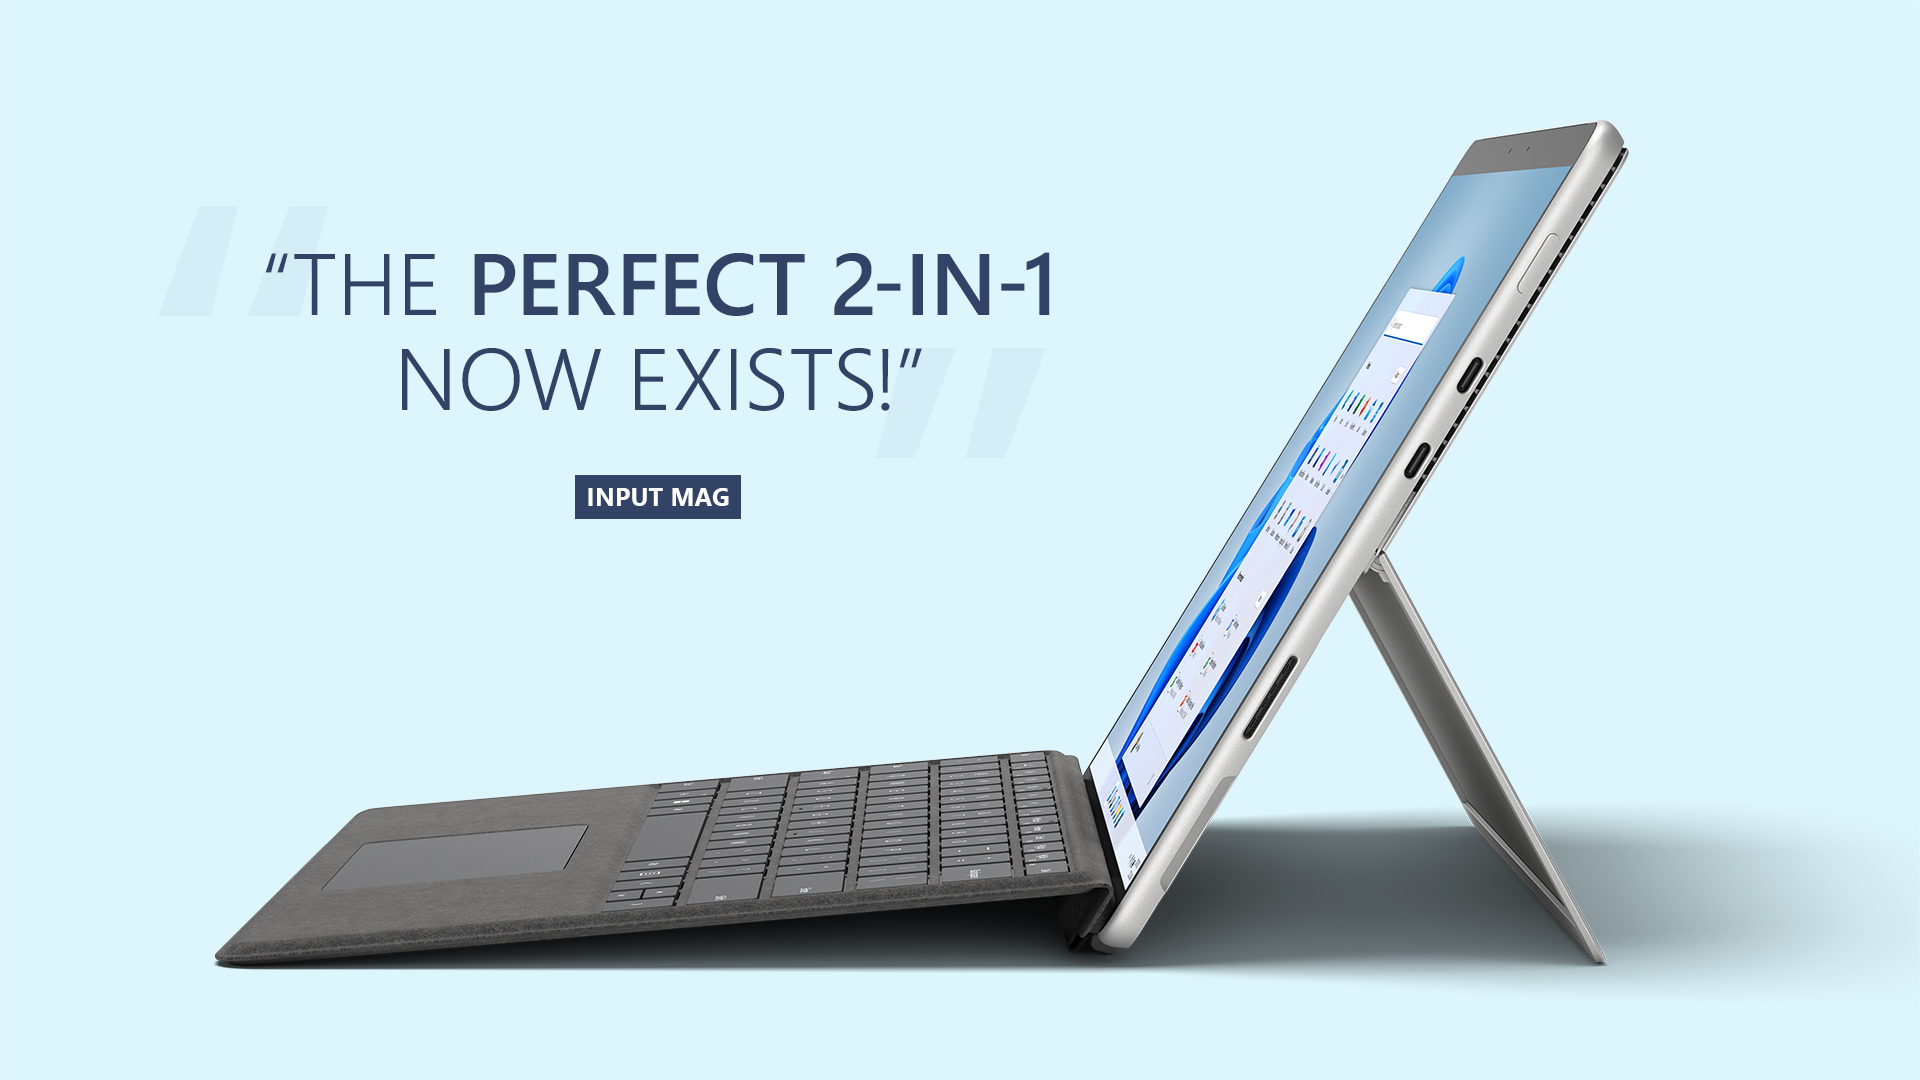 “A Surface 2-in-1 with Windows 11 installed, including a graphic headline that reads: “The perfect 2-in-1 now exists!” by Input Mag.